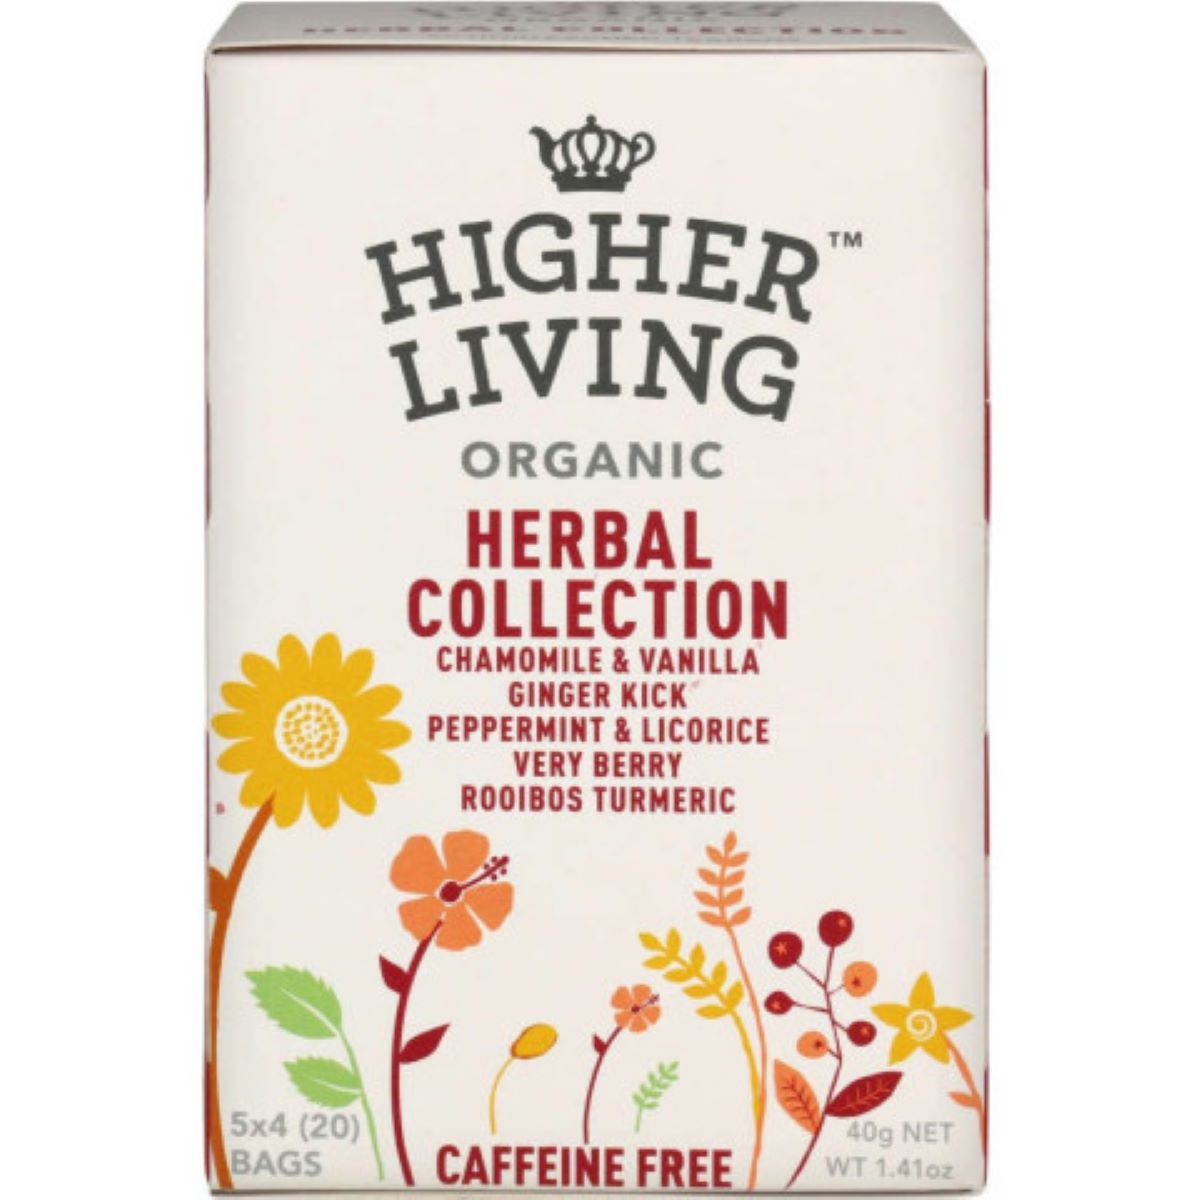 Higher Living Organic Herbal Collection 5x4 Teabags